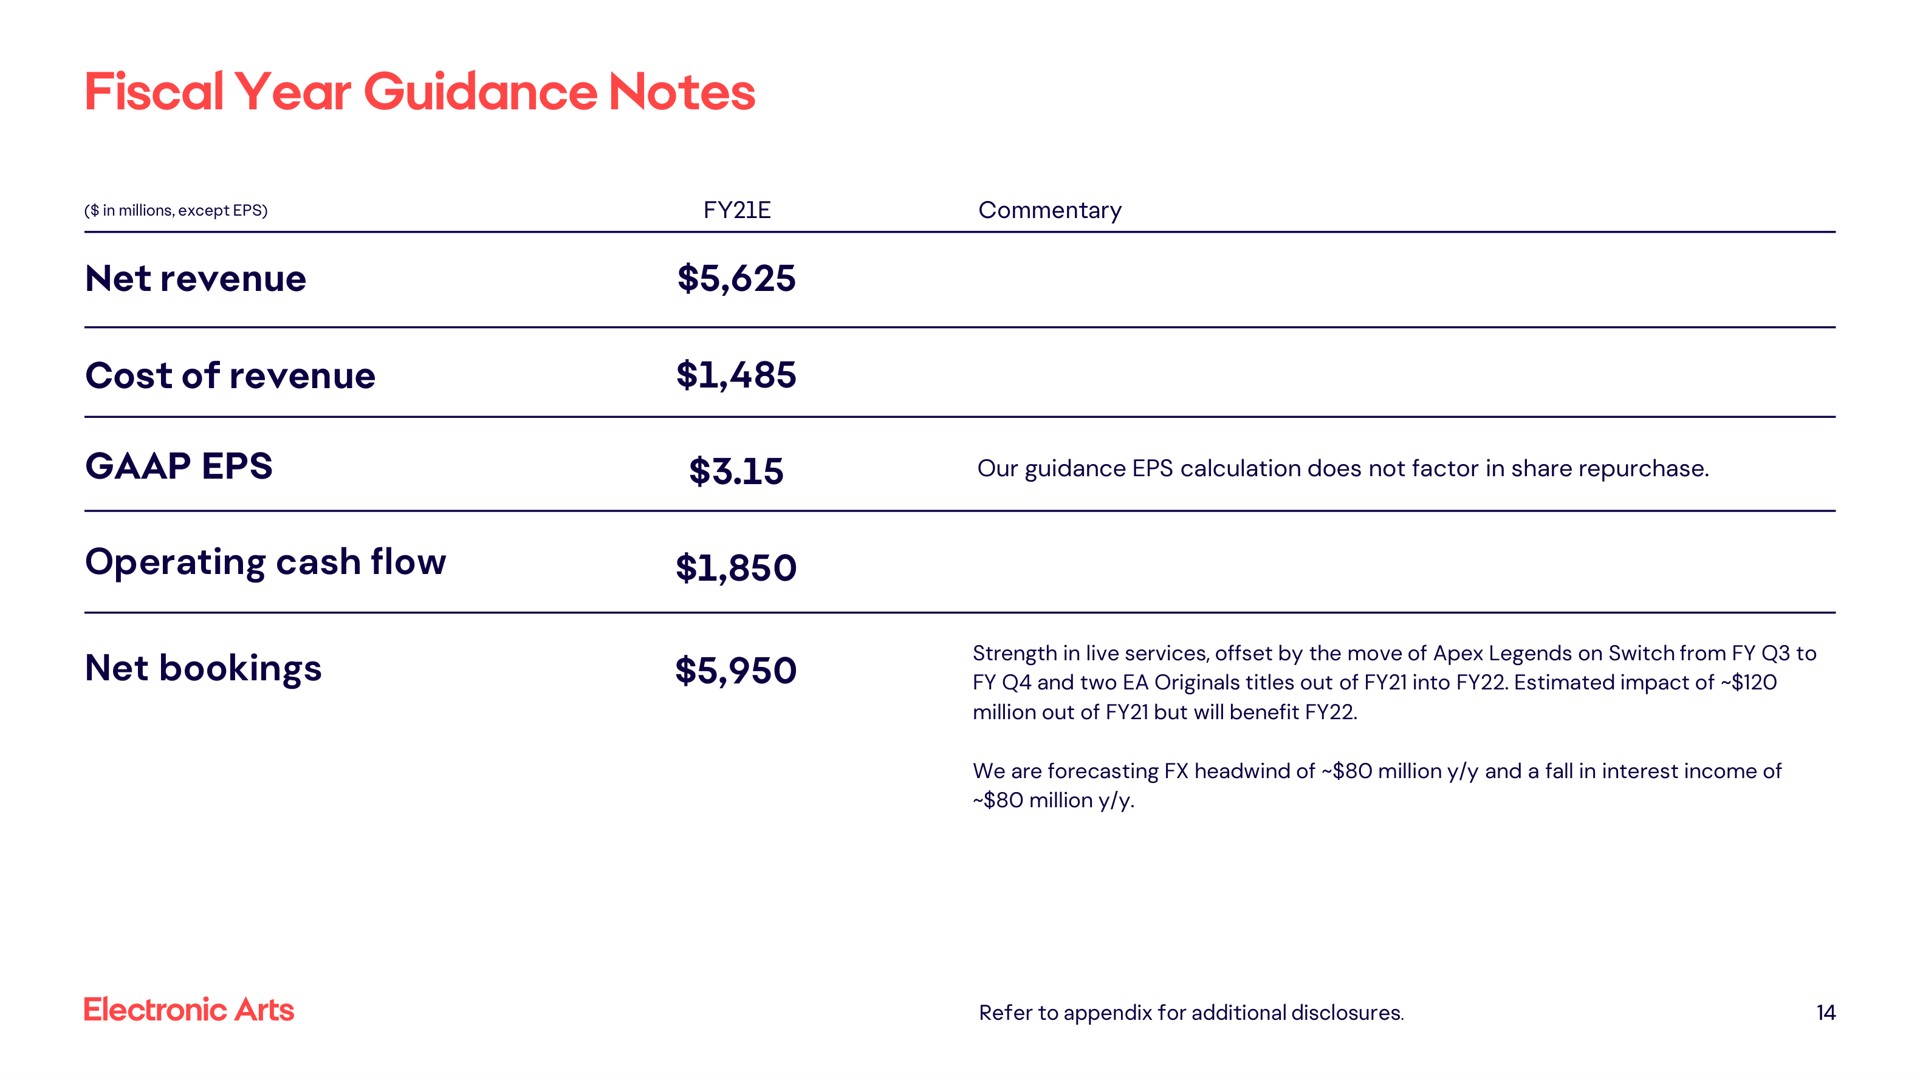 fiscal year guidance notes | Electronic Arts